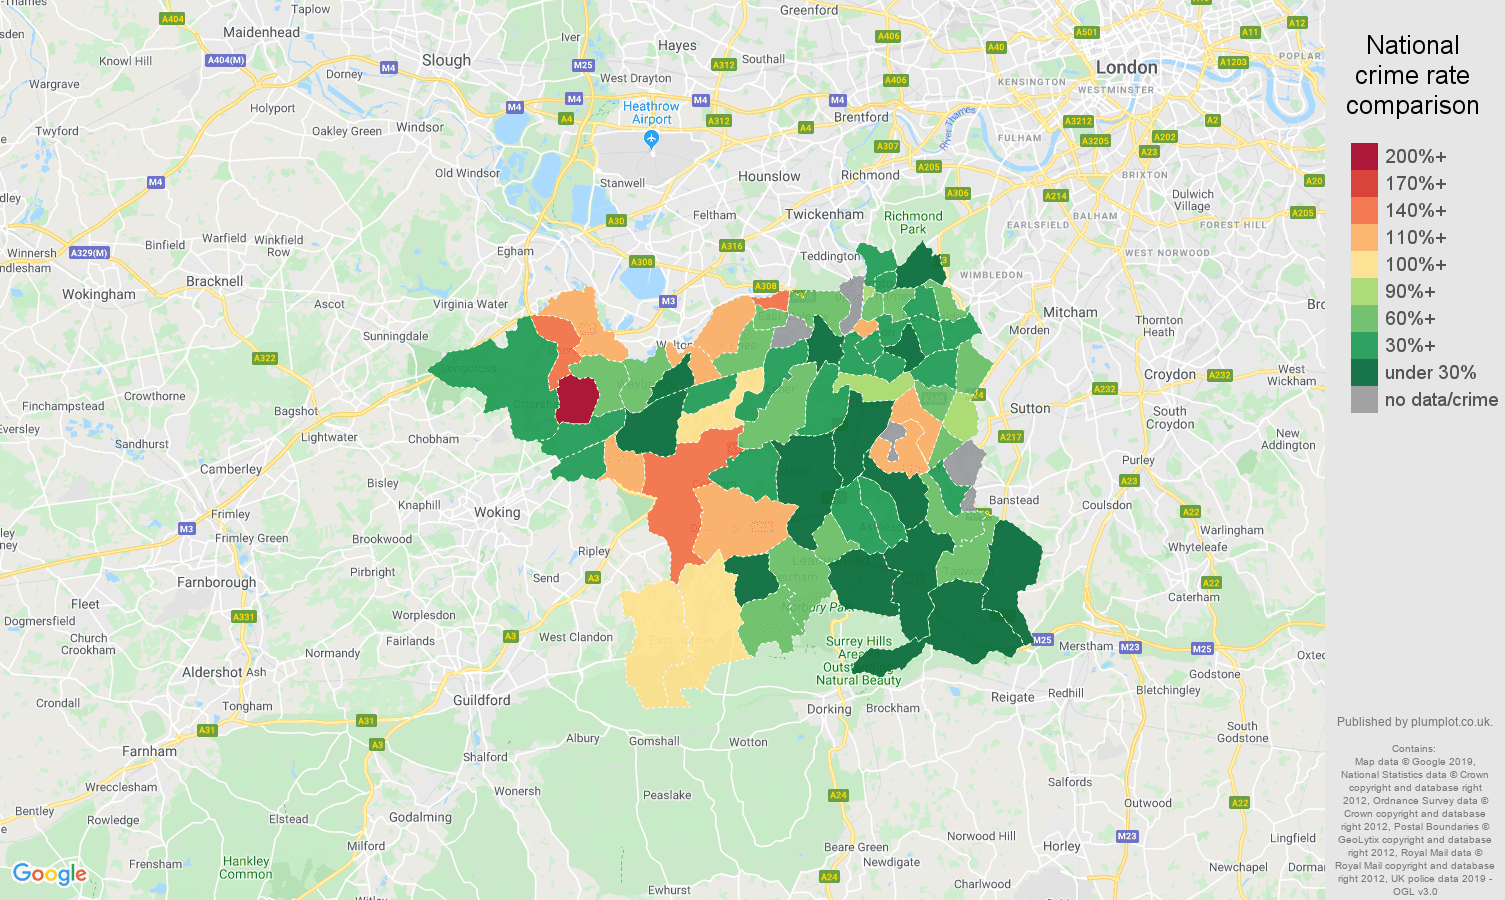 Kingston upon Thames other crime rate comparison map